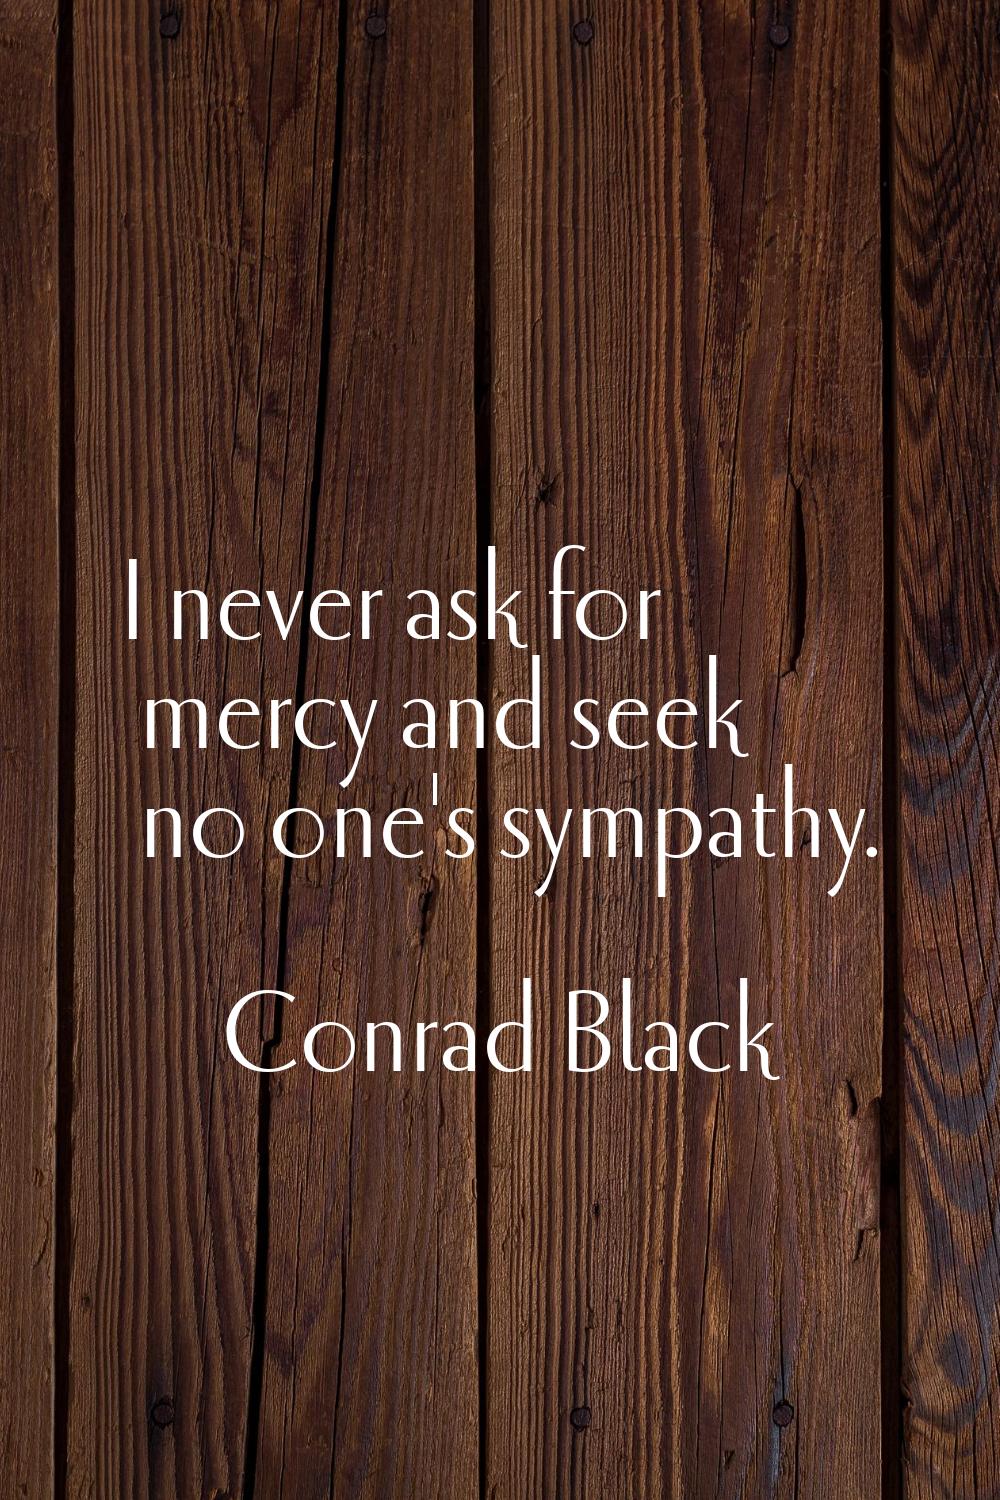 I never ask for mercy and seek no one's sympathy.